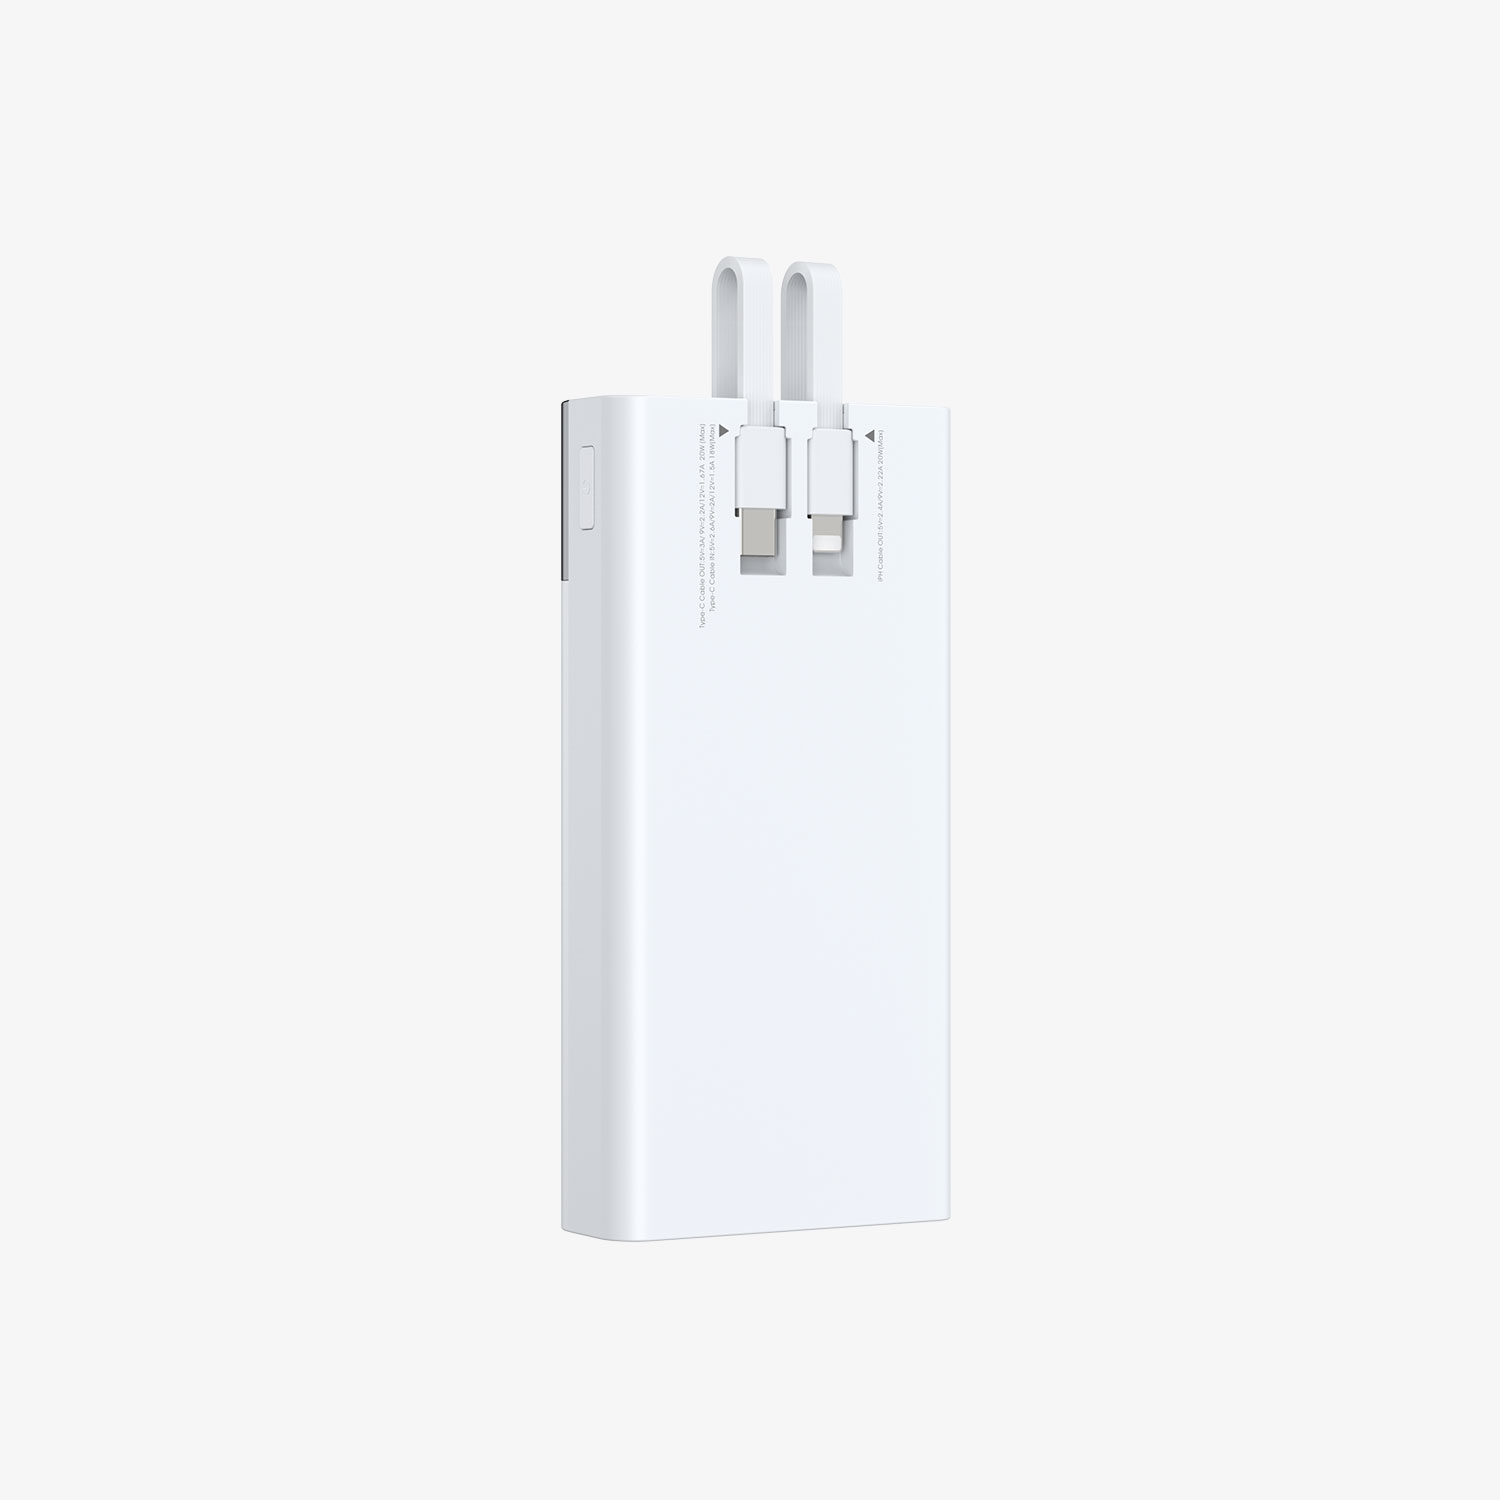 wired power bank